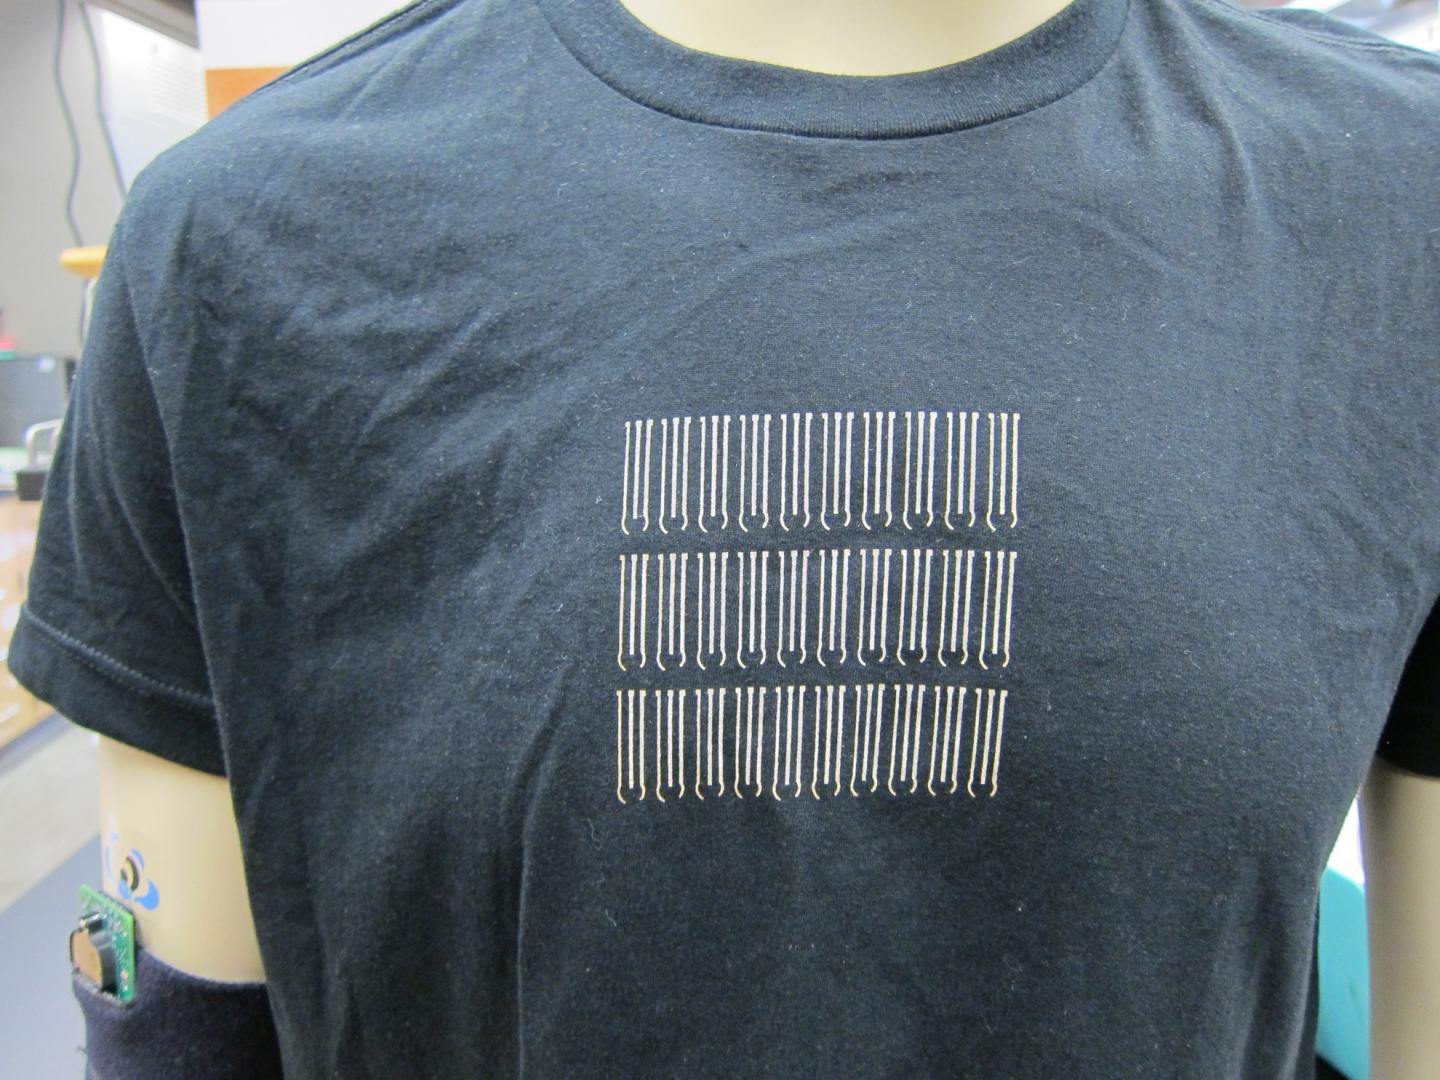 T-Shirt with Printed Electrodes